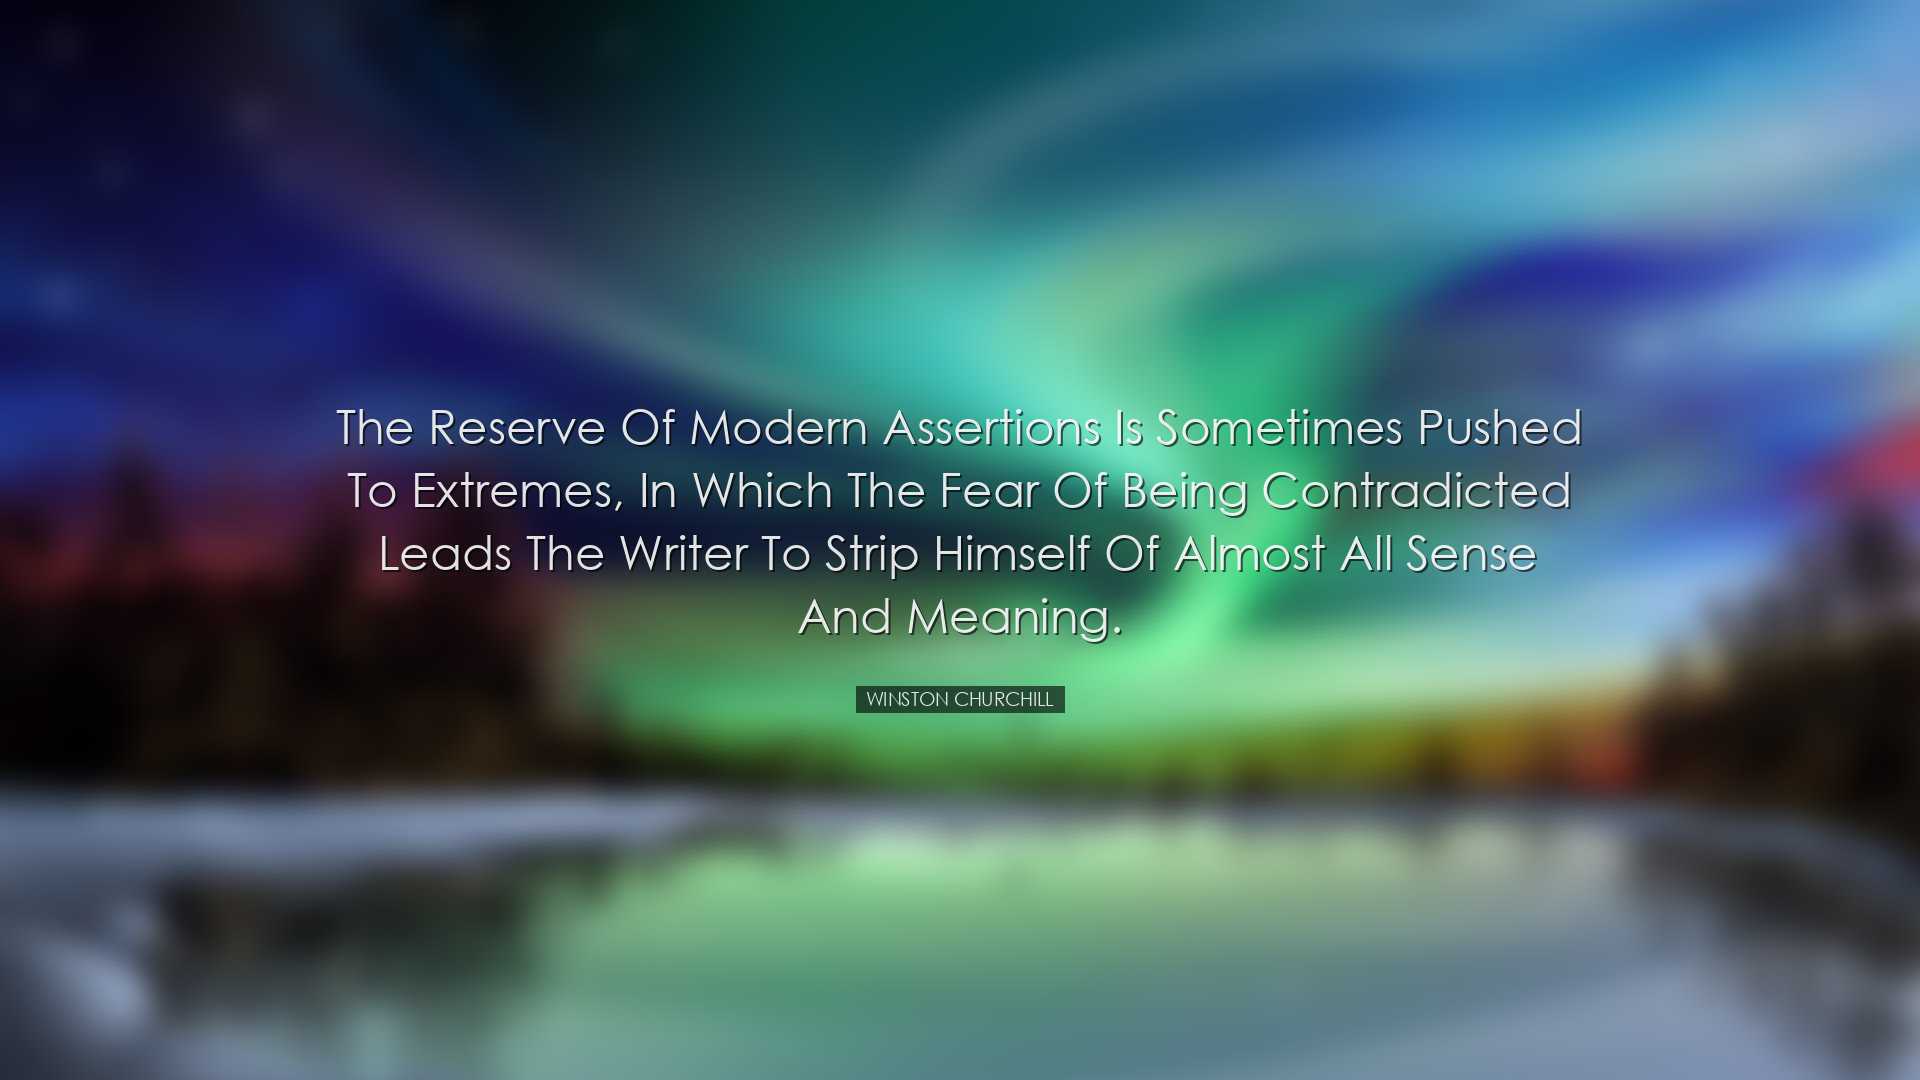 The reserve of modern assertions is sometimes pushed to extremes,